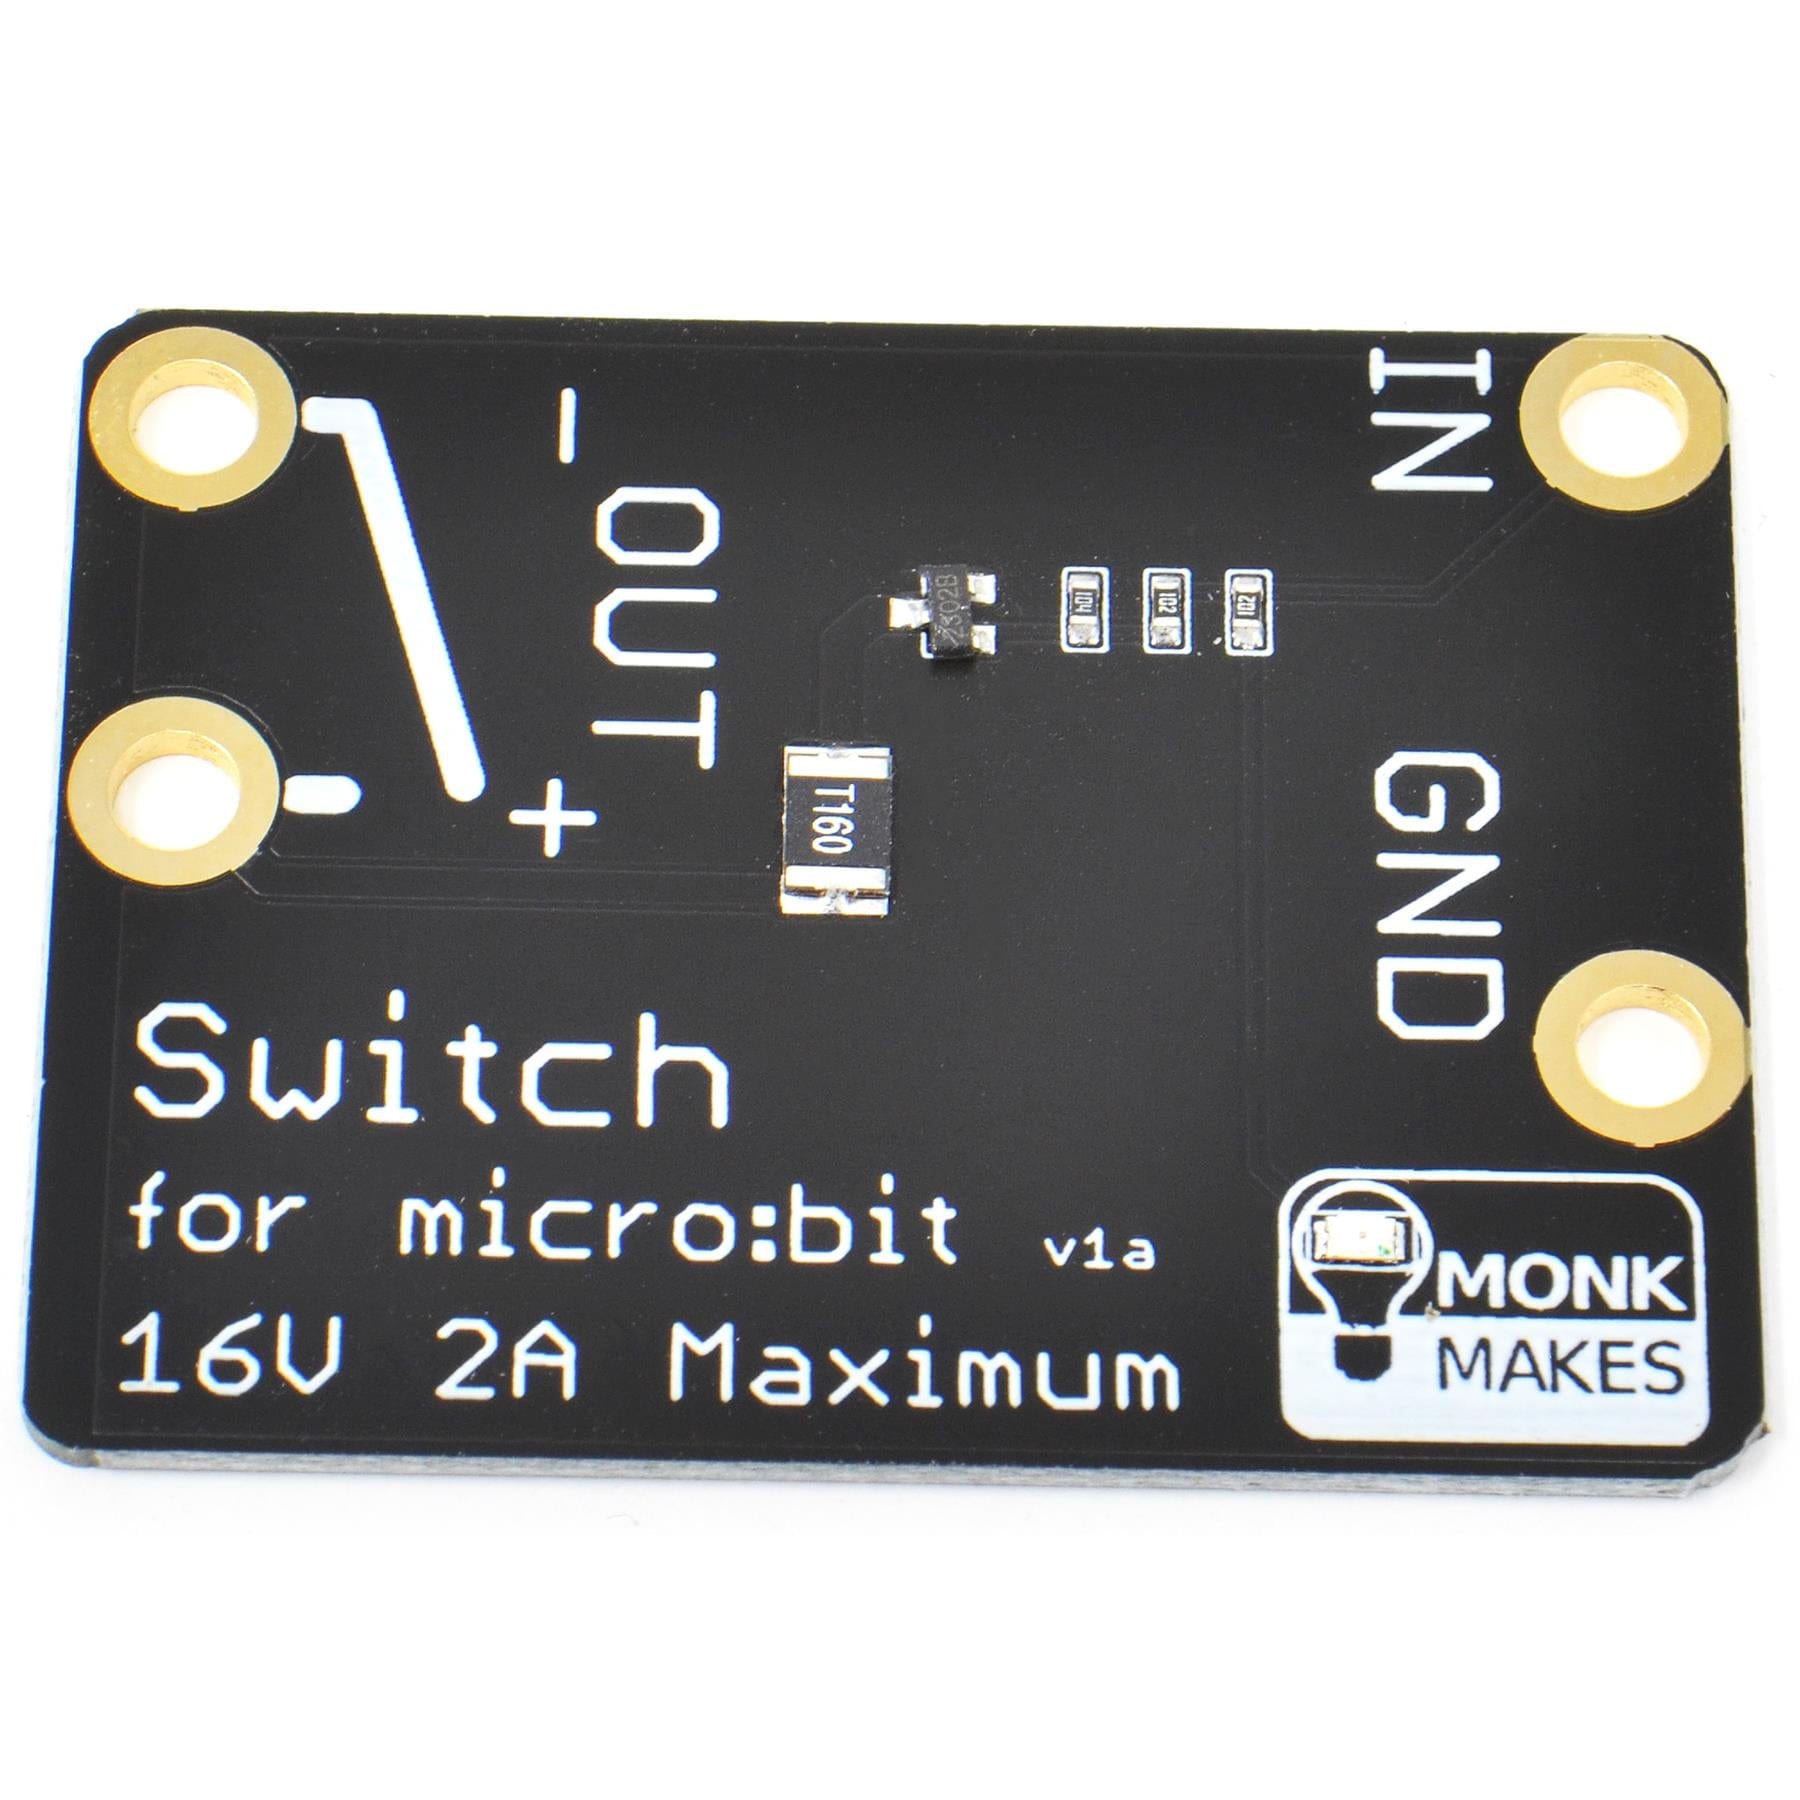 Switch for micro:bit - The Pi Hut